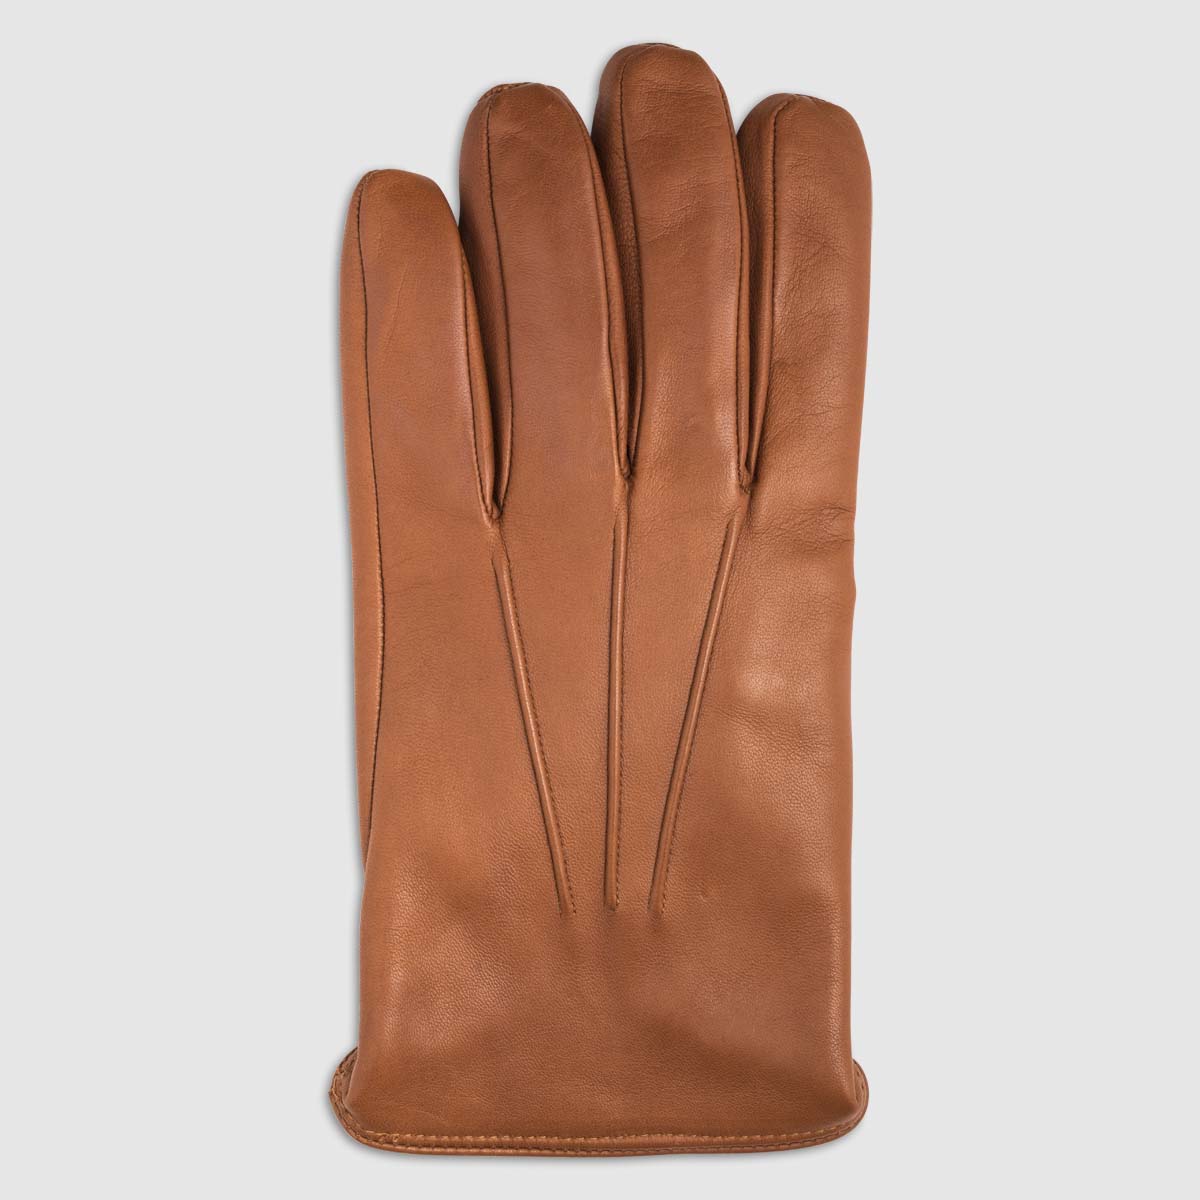 Nappa Leather Glove with Cashmere Lining in Cognac